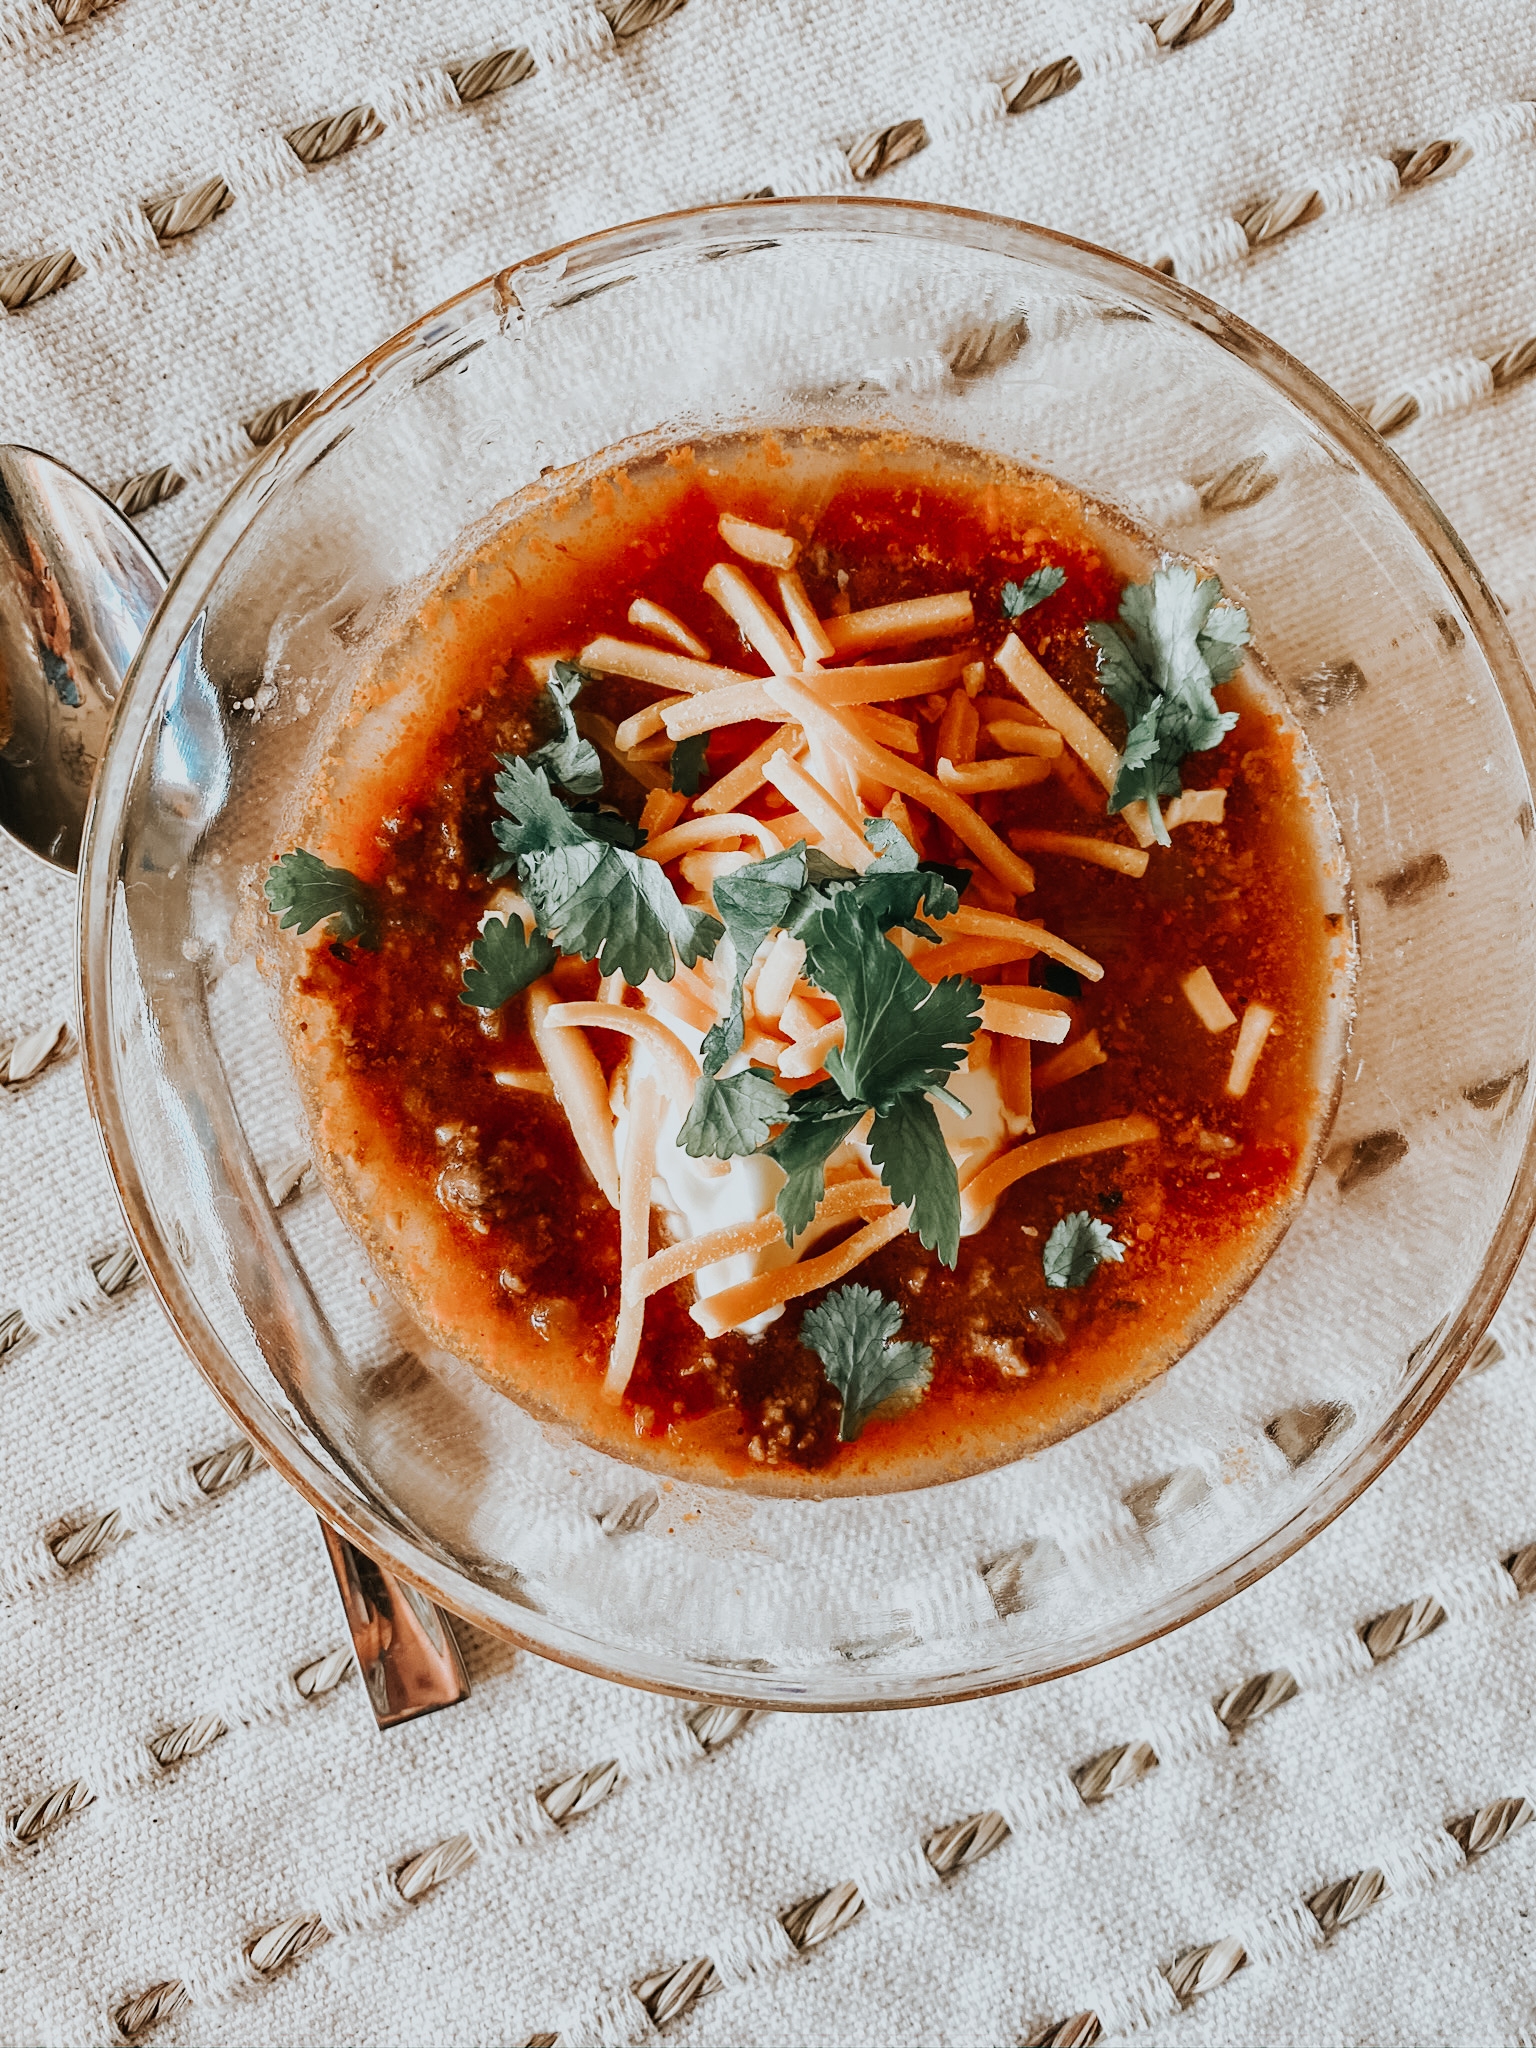 Easy Beanless Chili Keto Recipe for your Crock Pot by Alabama Life + Style Blogger, Heather Brown // My Life Well Loved